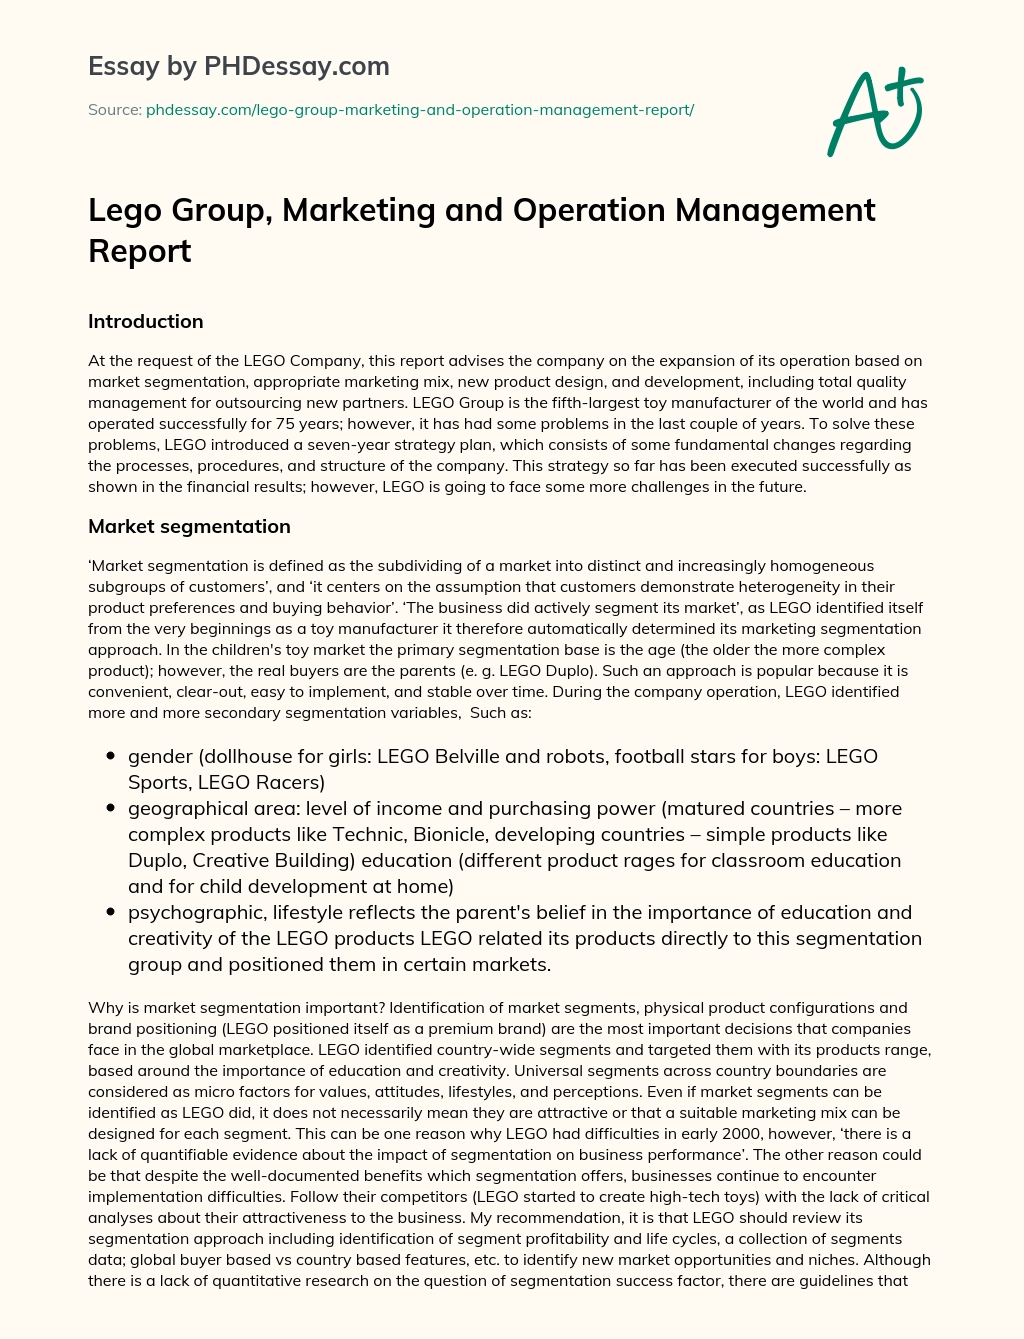 Lego Group, Marketing and Operation Management Report essay